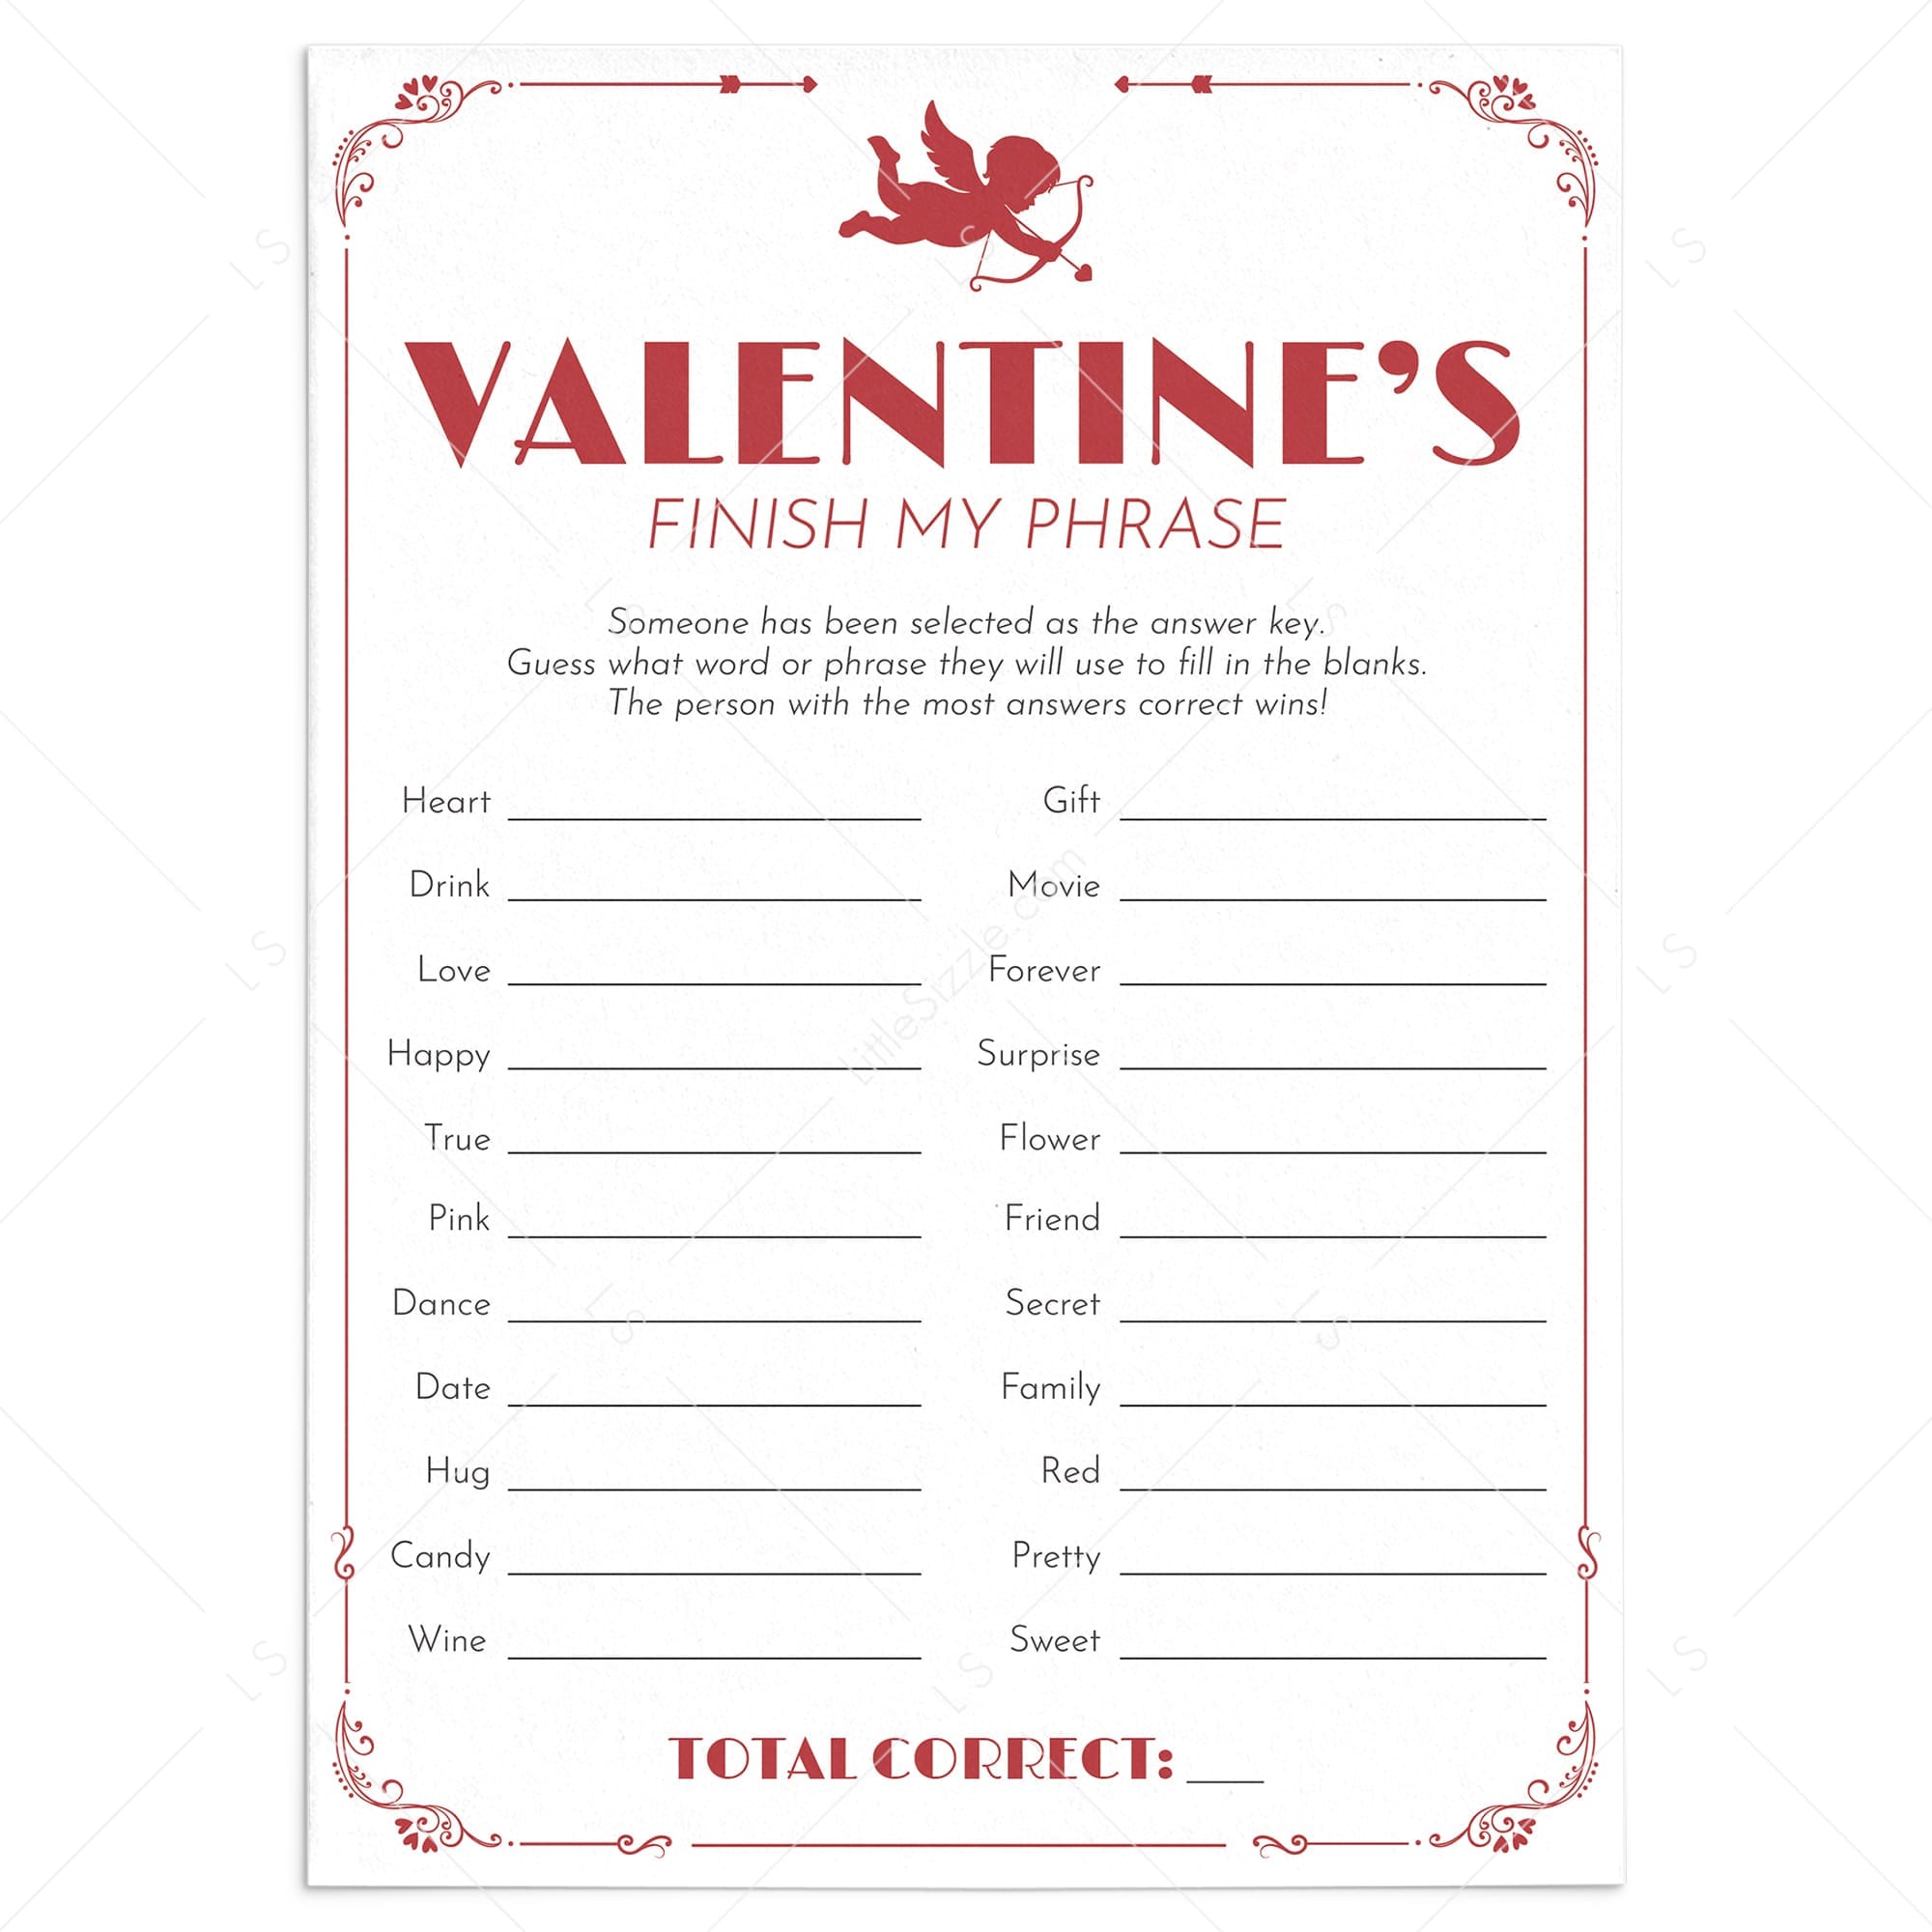 Printable Valentines Game for Group Finish My Phrase by LittleSizzle